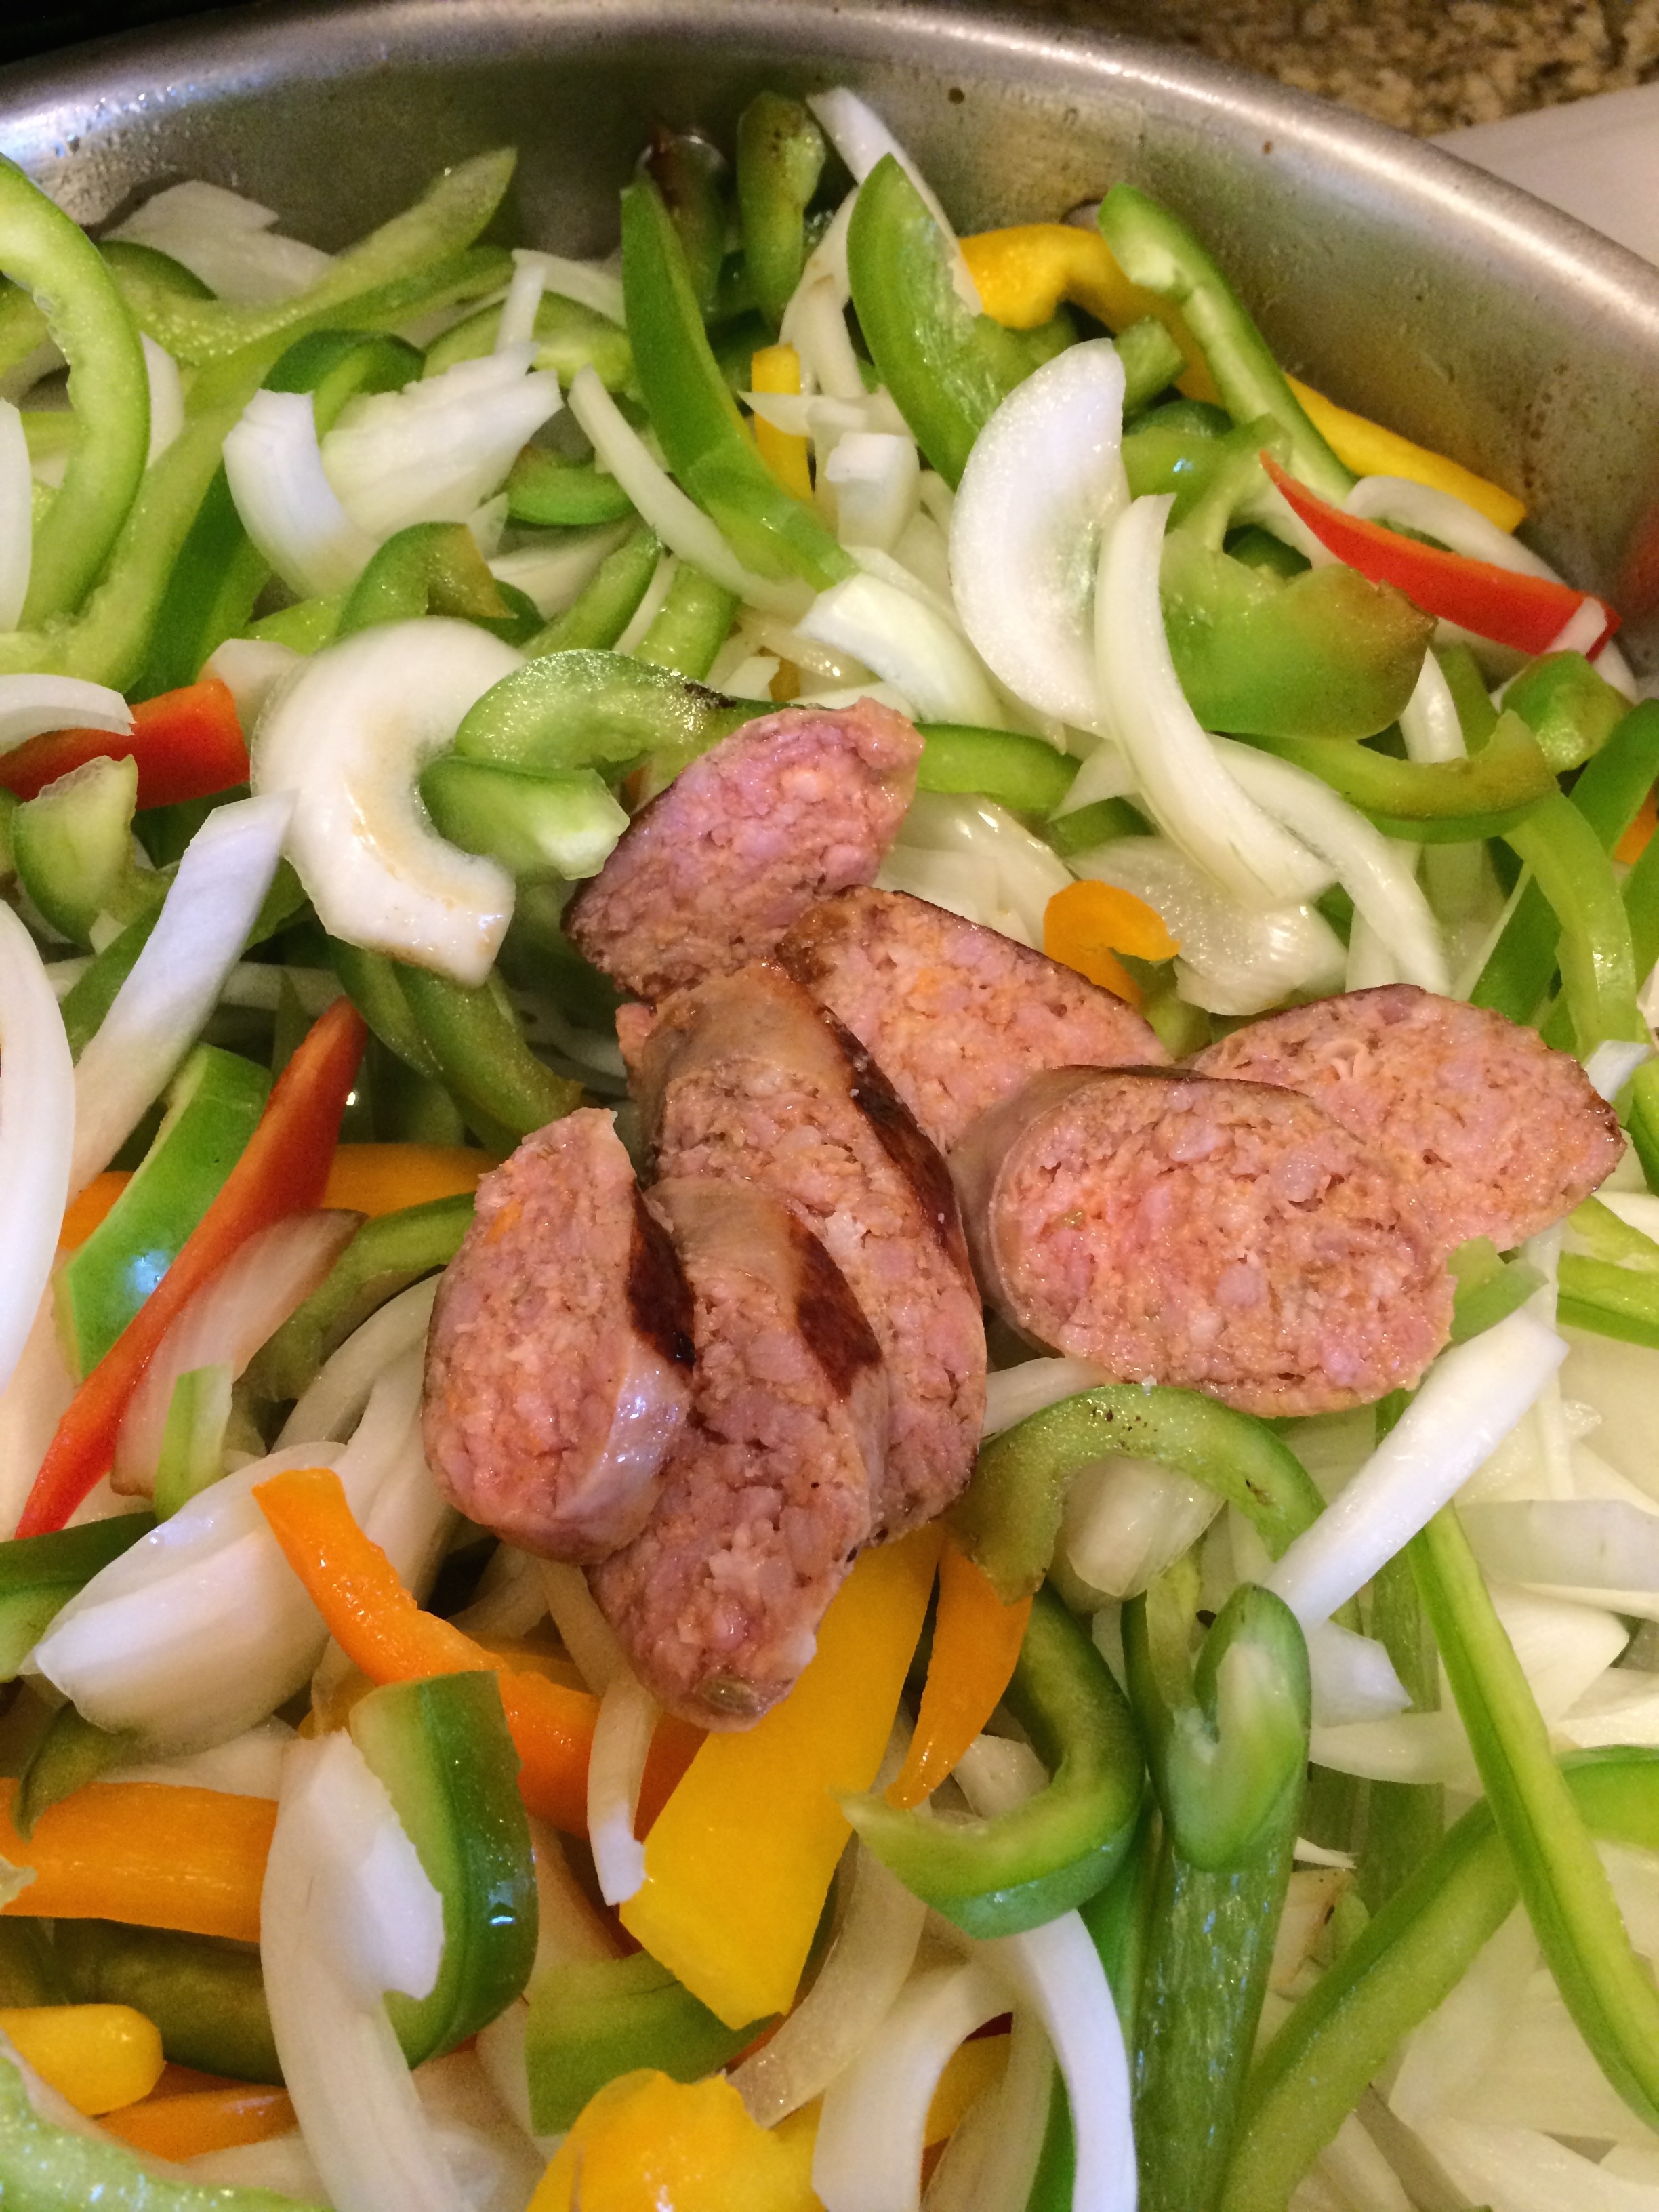 sausage with bell peppers and onions, confit